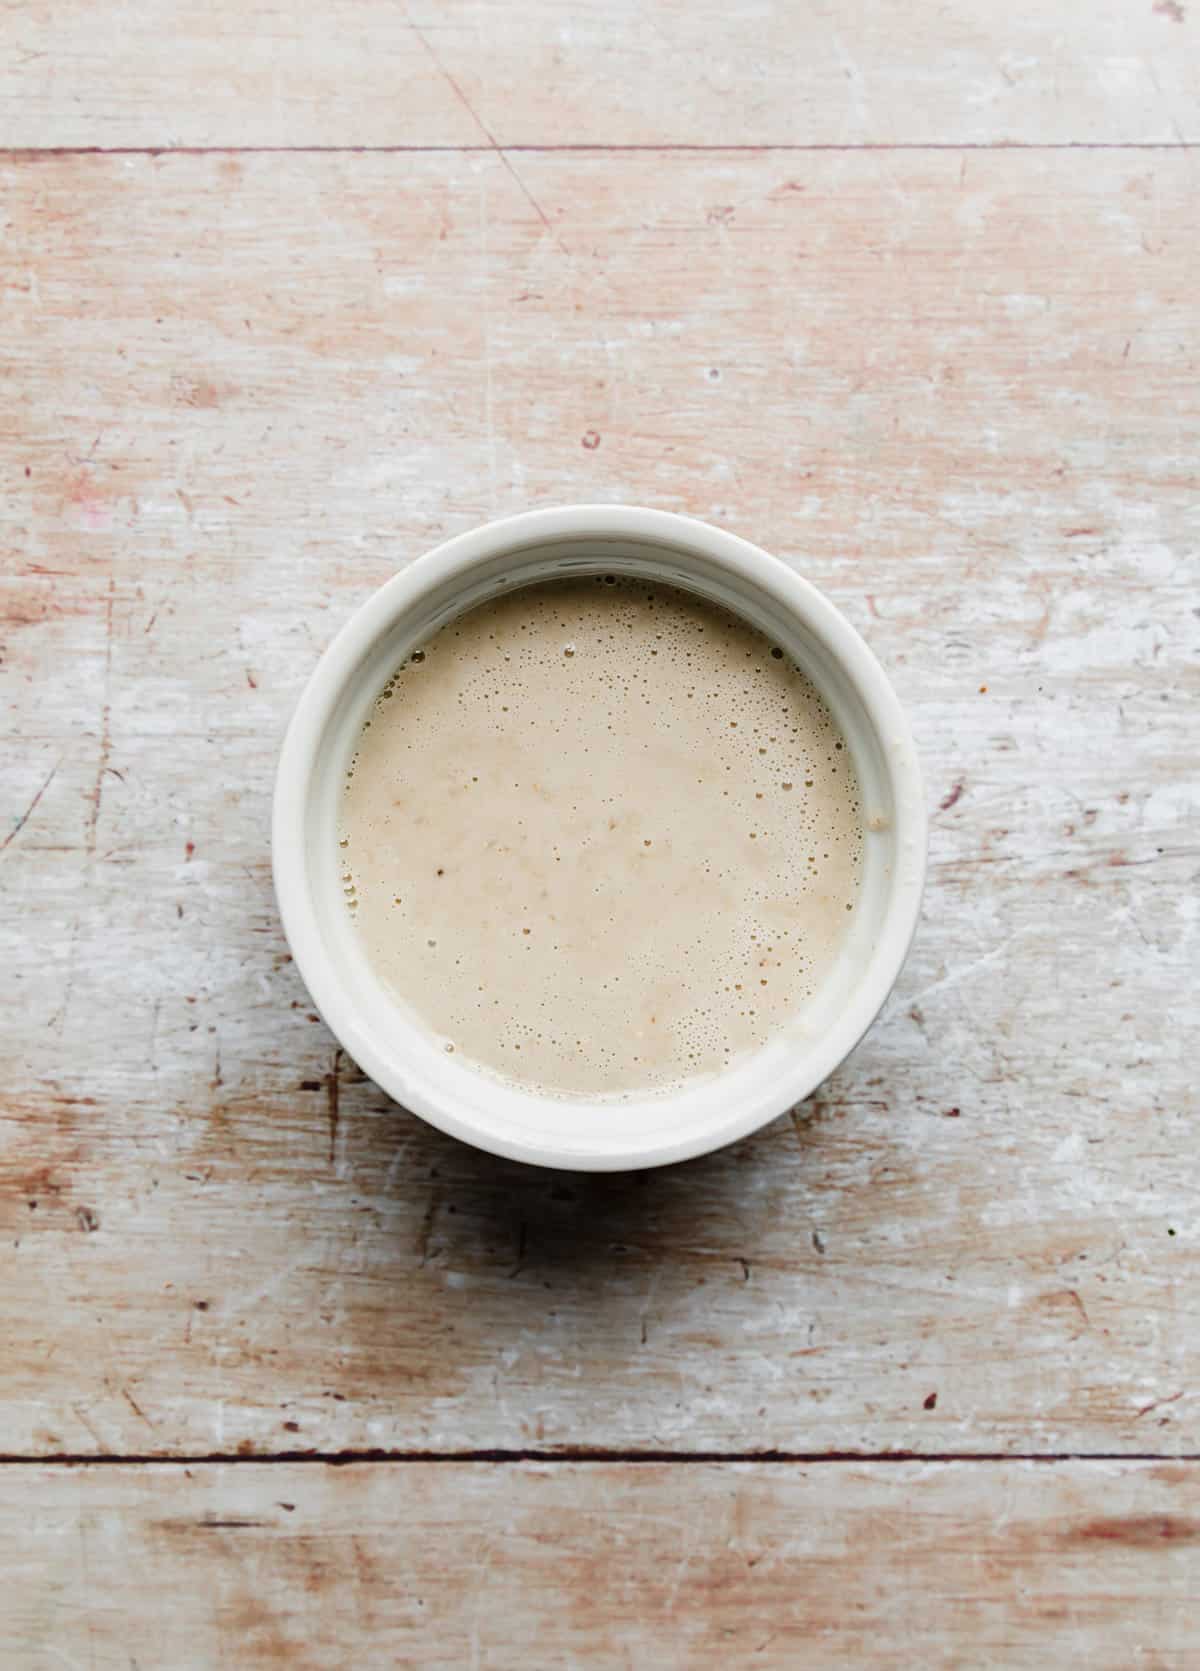 A tan colored oat liquid mixture in a white ramekin on a light brown wooden background.